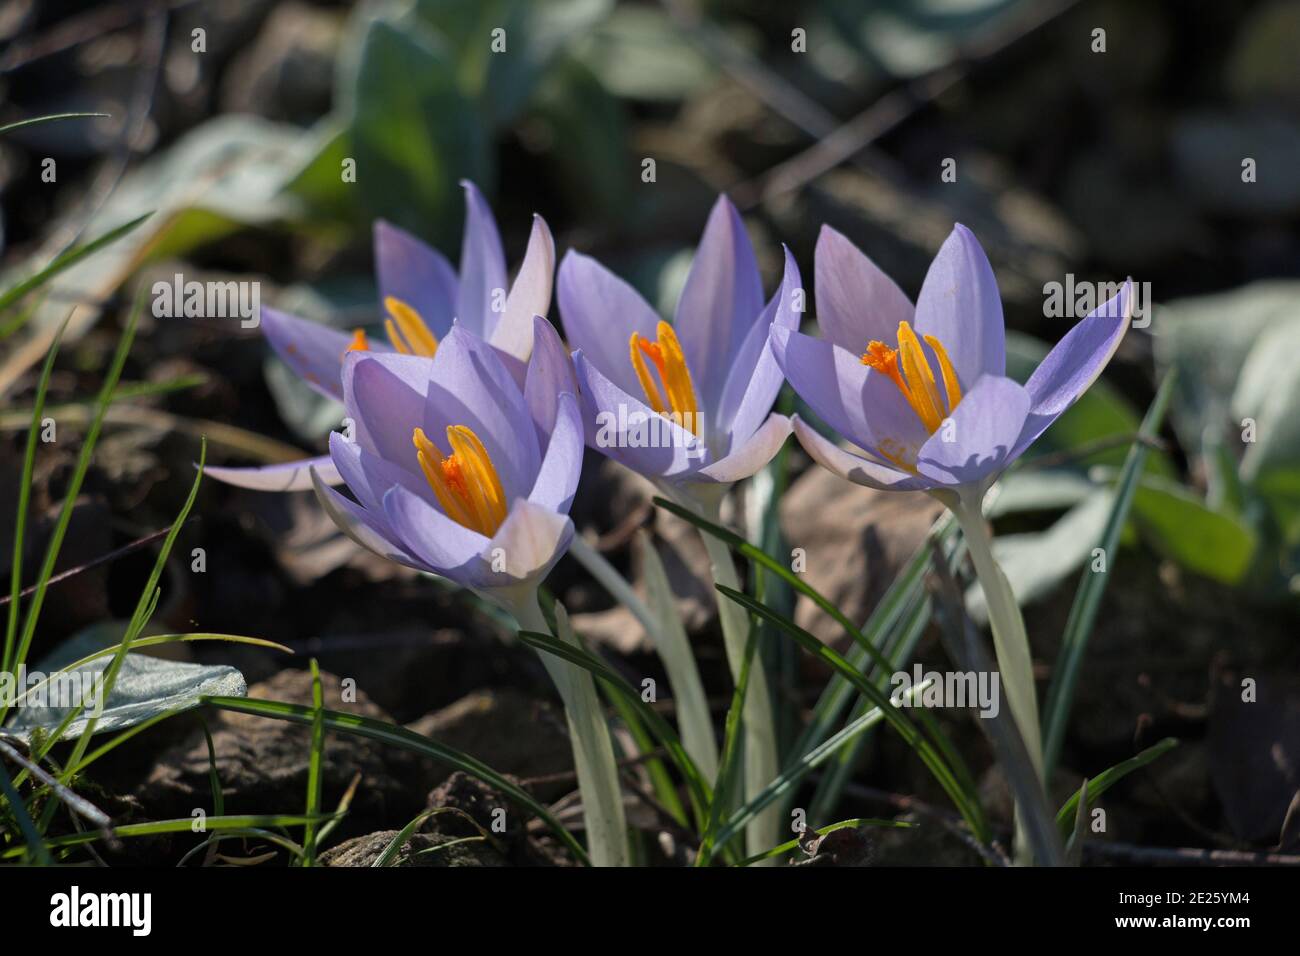 Pale purple crocus flowers, Crocus tommasinianus, Lilac Beauty, showing stigma and stamens, blooming in spring in Britain, close-up Stock Photo